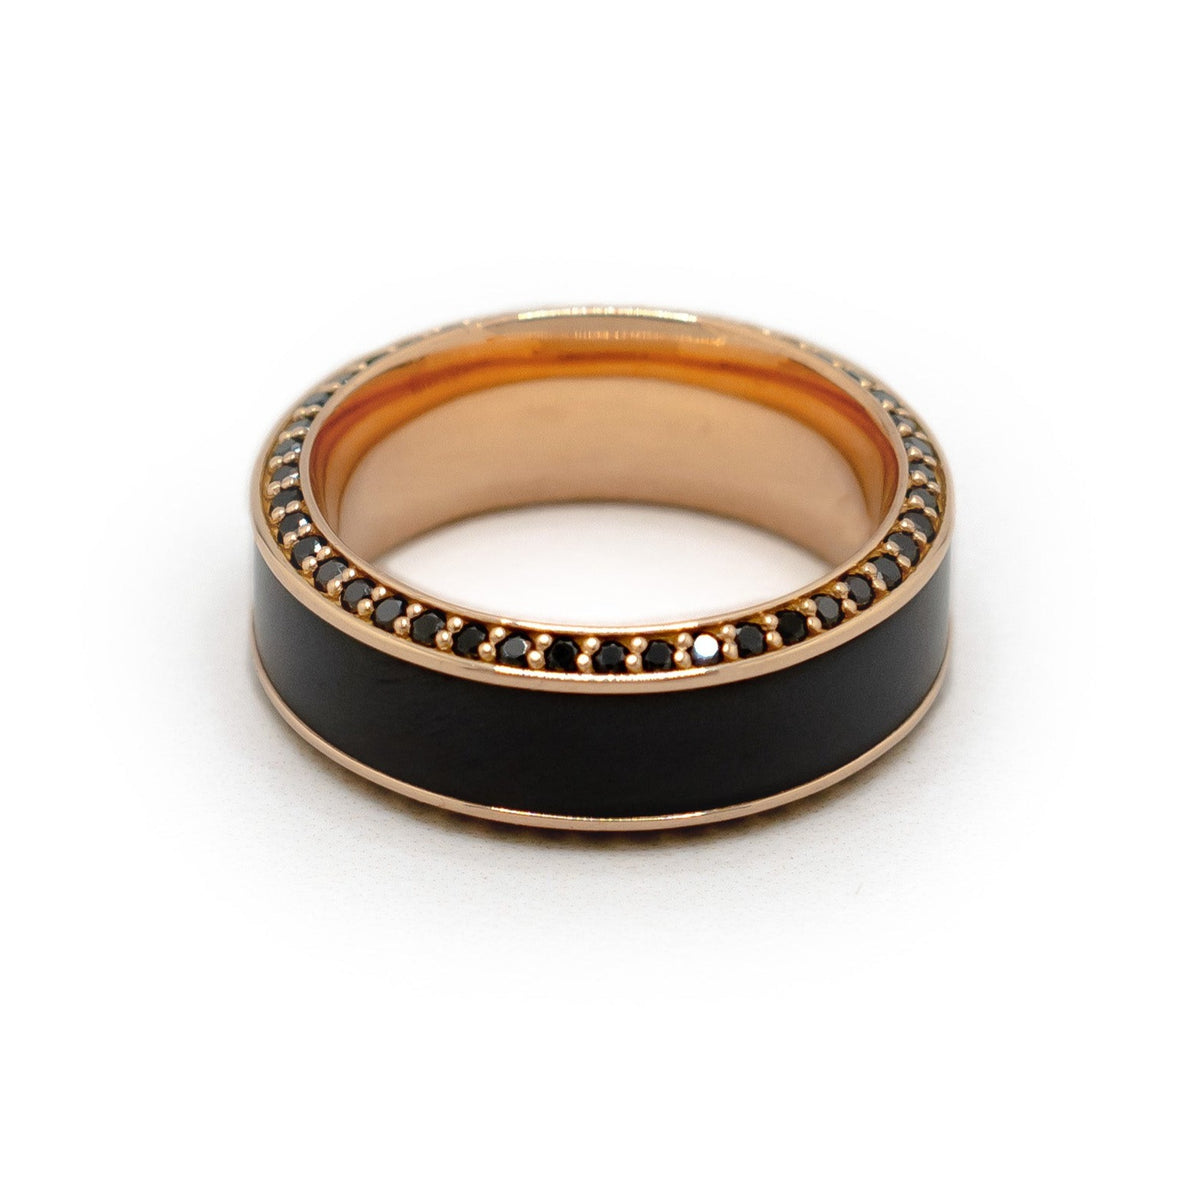 Helios Beveled with Black Diamond Insets in 18k Rose Gold Ring 7mm